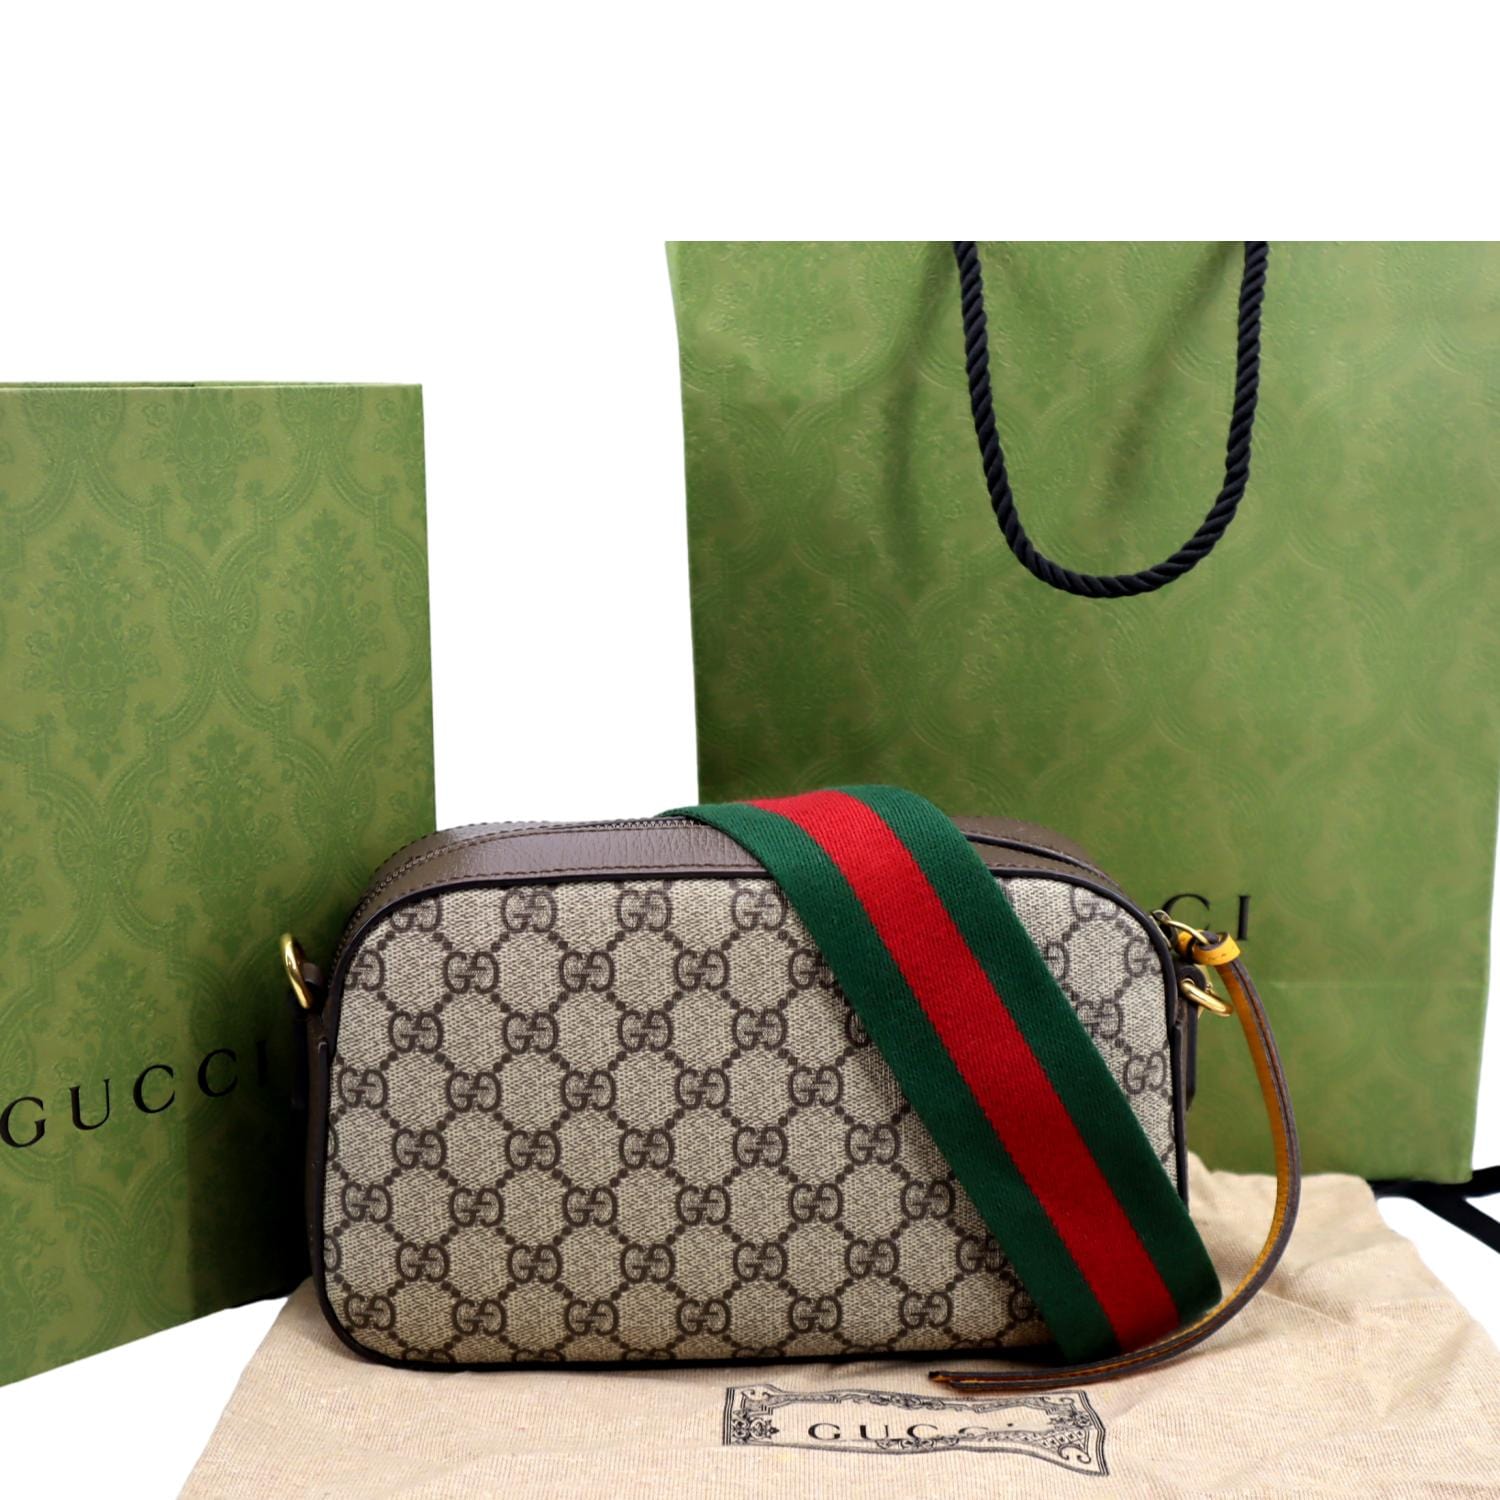 Green GG Supreme canvas and leather cross-body bag